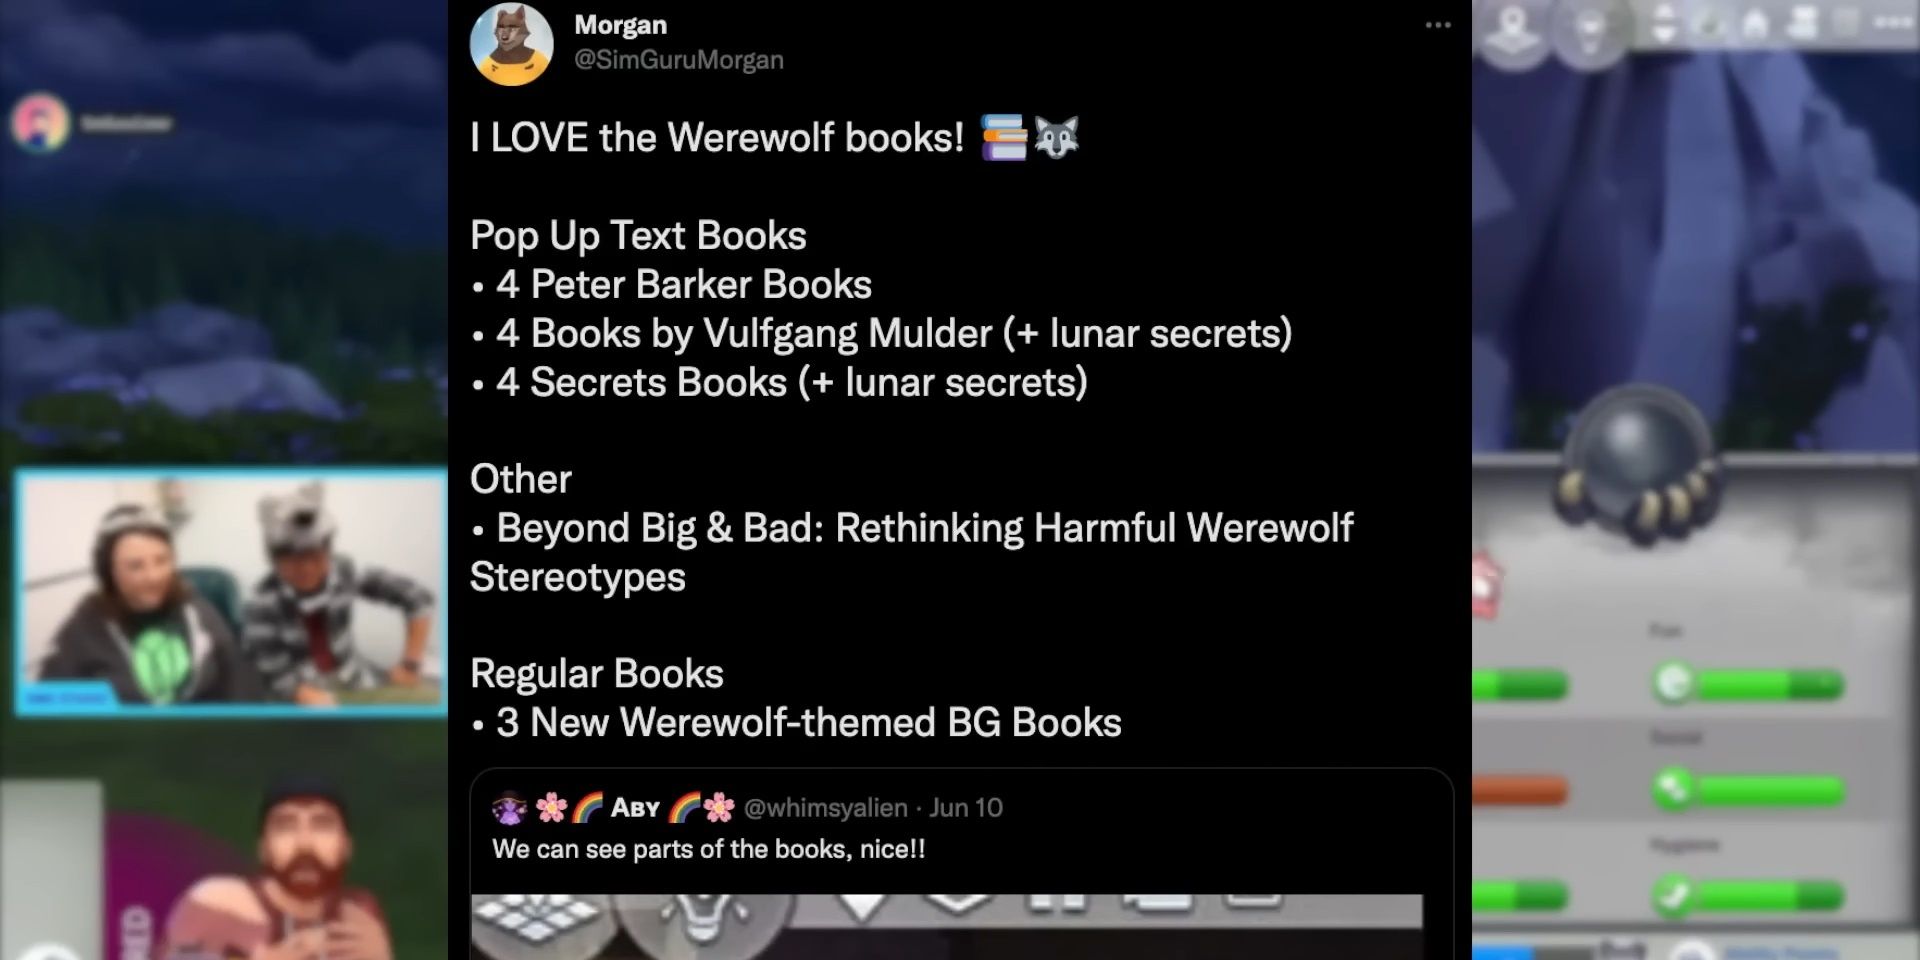 A tweet by SimGuruMorgan overlaying footgage of The Sims 4: Werewolves Livestream